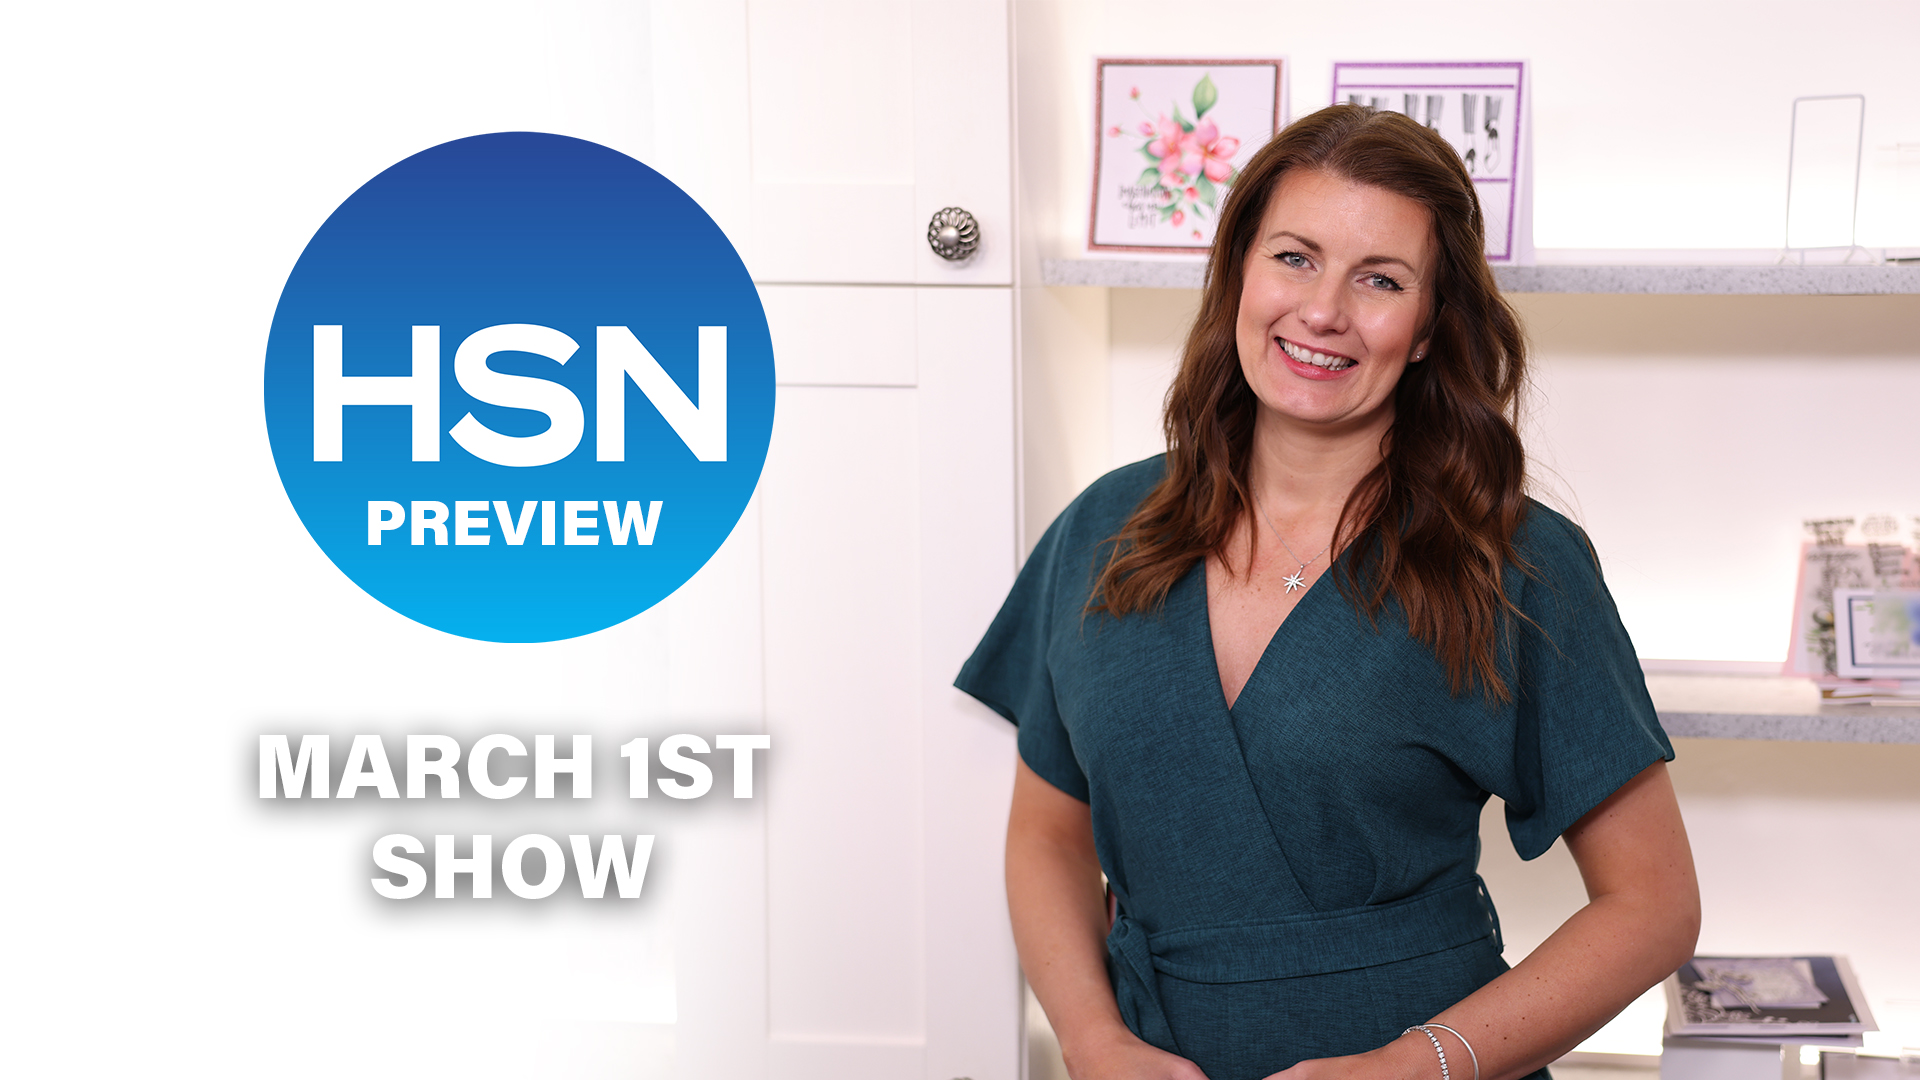 join-toni-for-her-product-preview---hsn-show-1st-march---broadcast-monday-21st-february-22